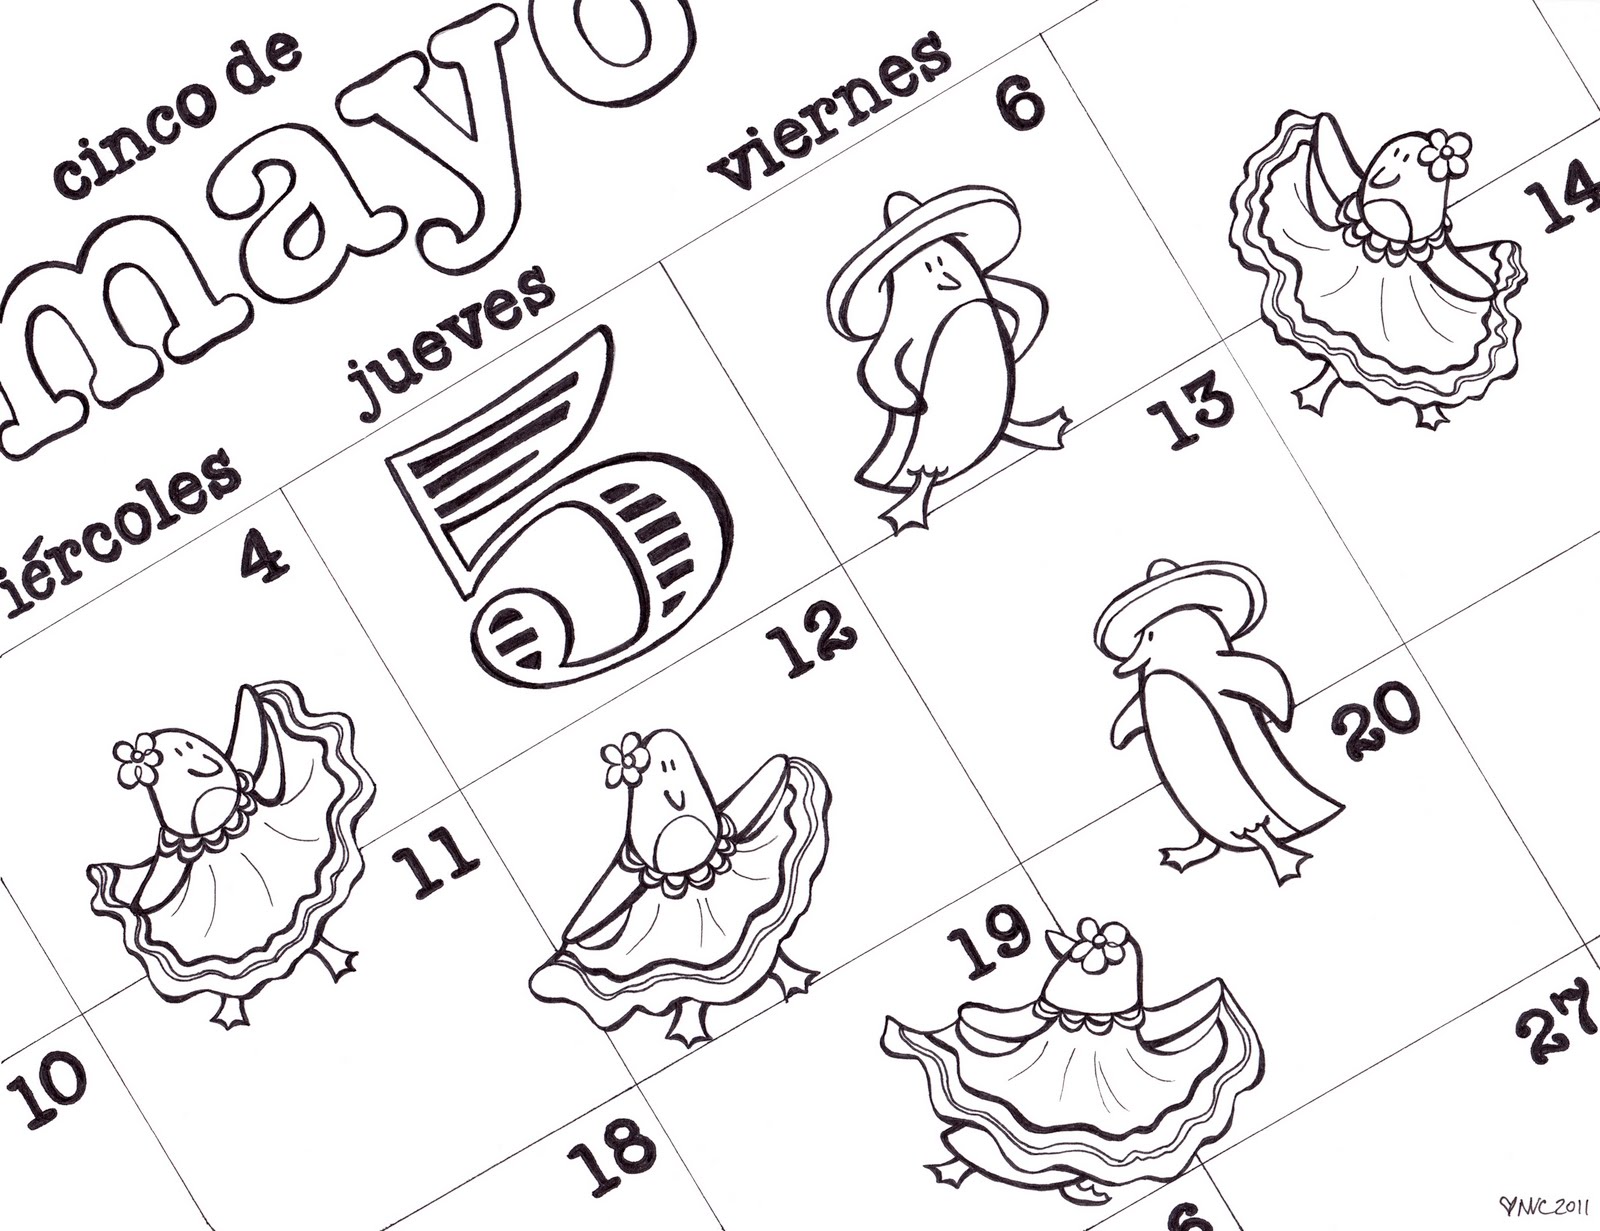 Cinco de mayo coloring pages to download and print for free